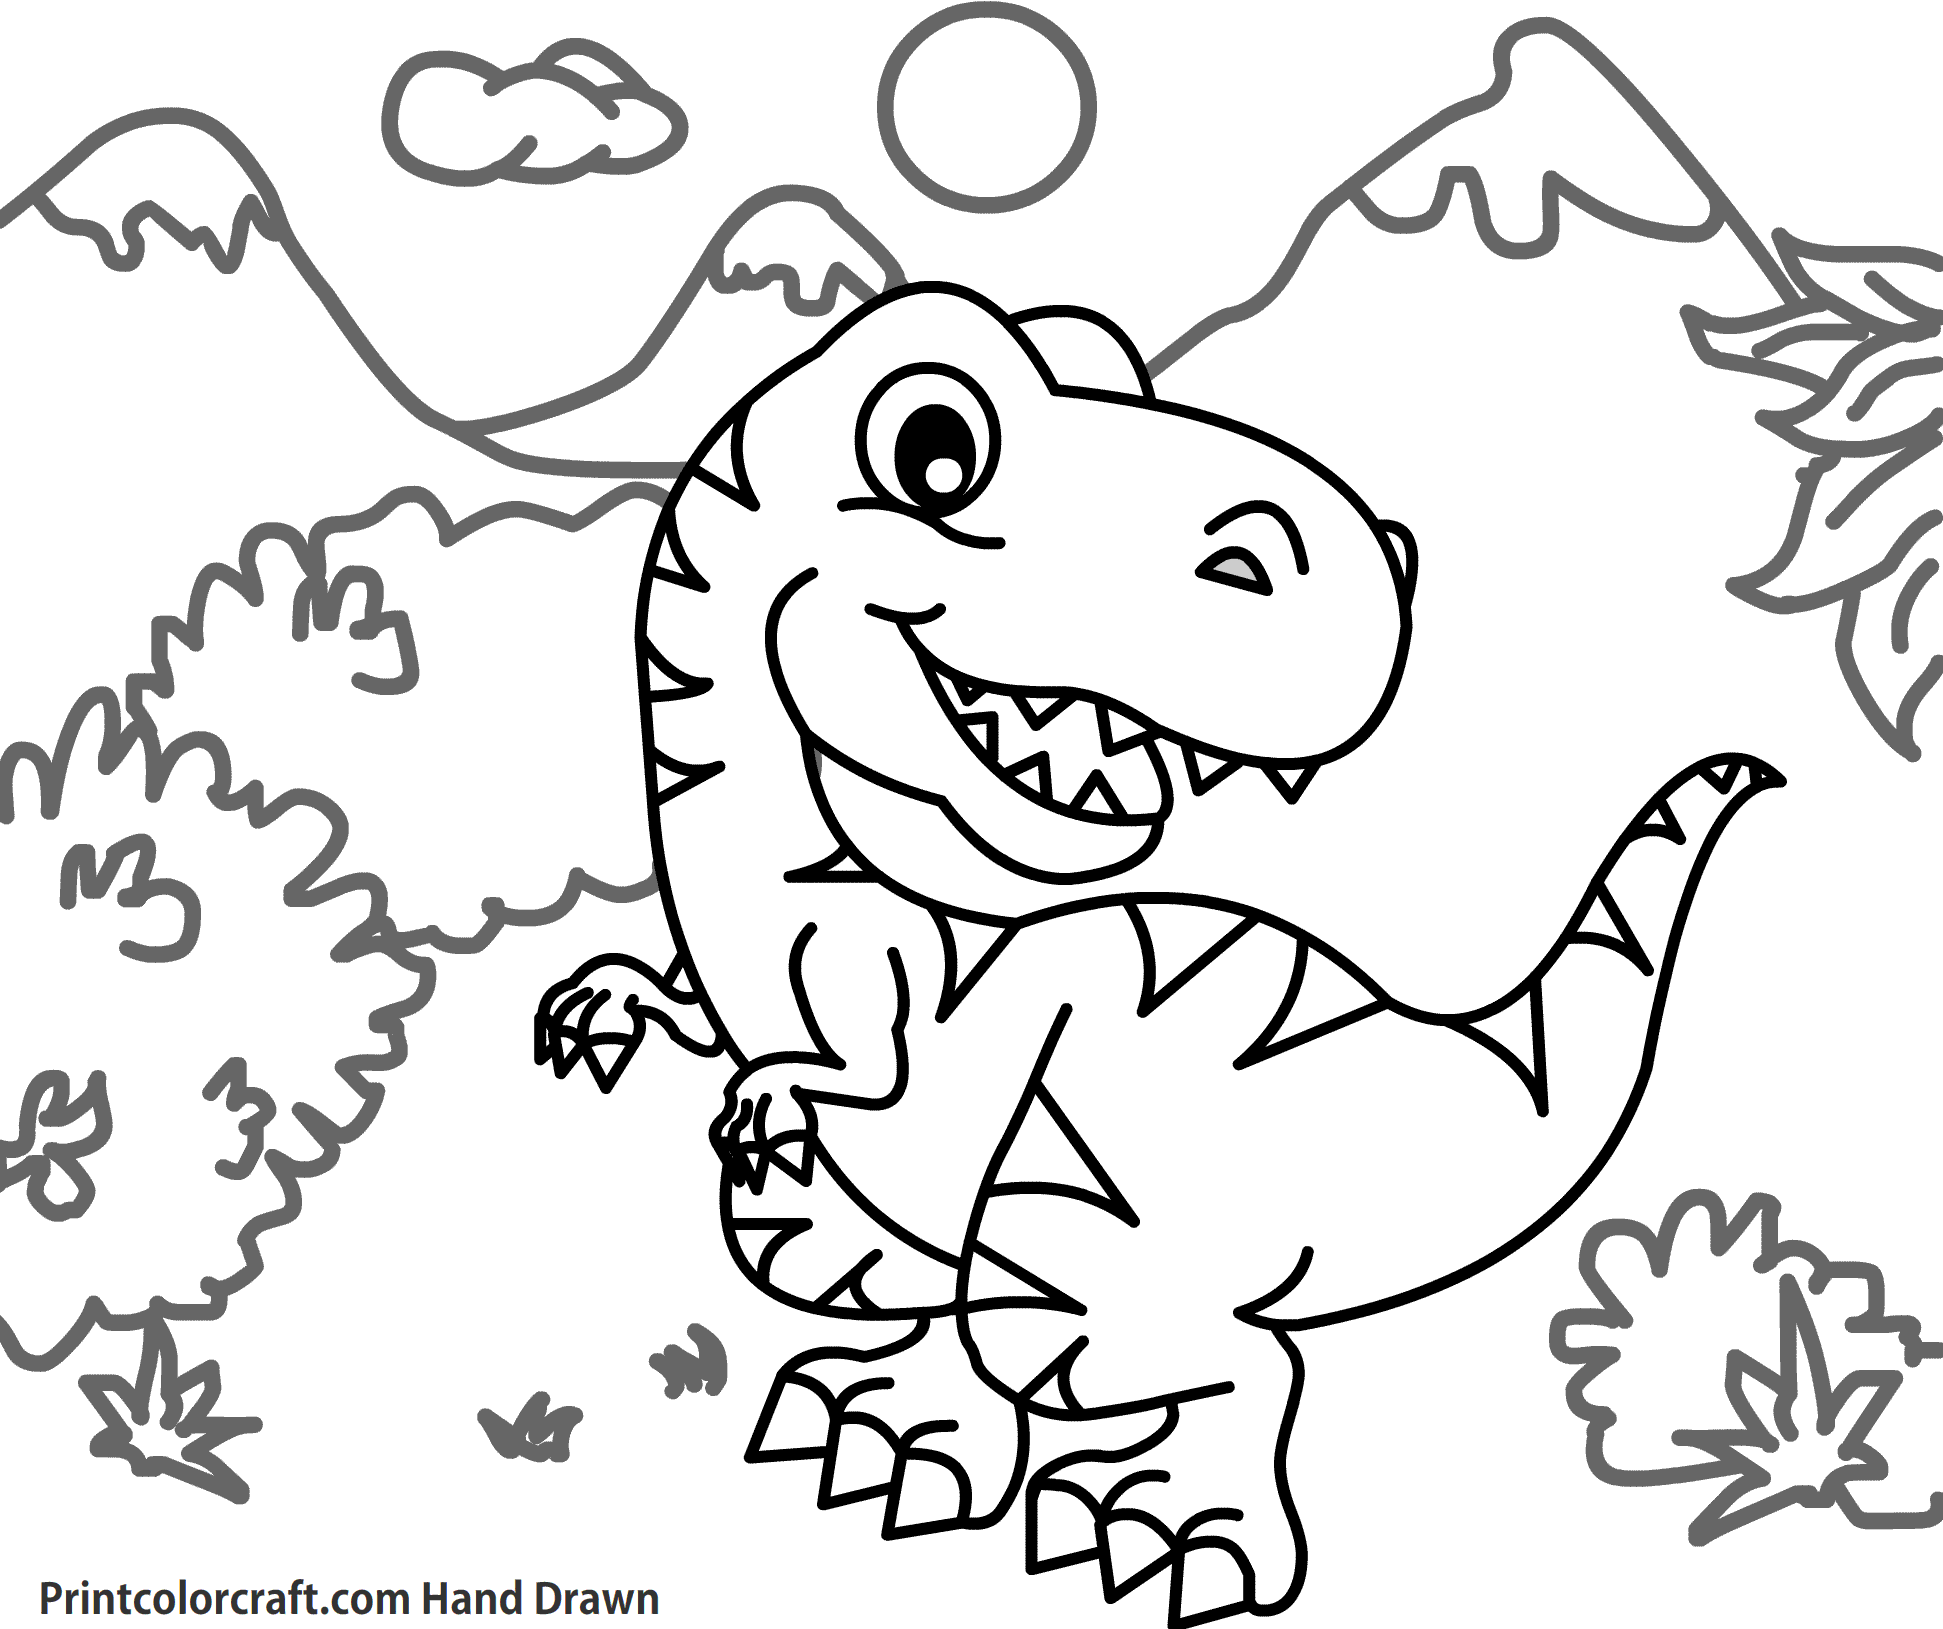 37 Printable Dinosaur Coloring Pages Animal Pages   Print Color Craft